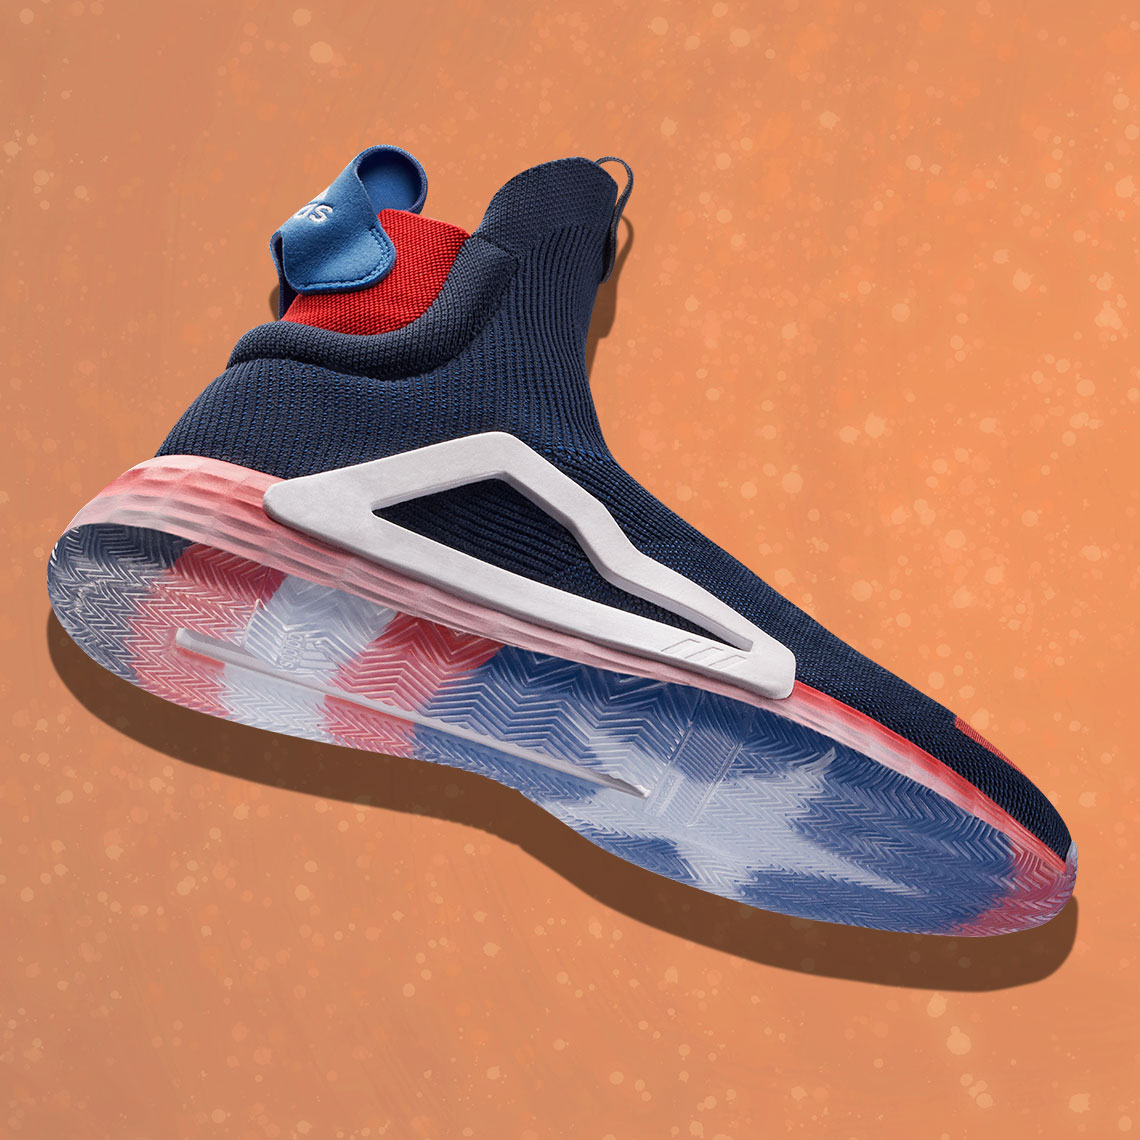 Marvel adidas Basketball Shoes Release 